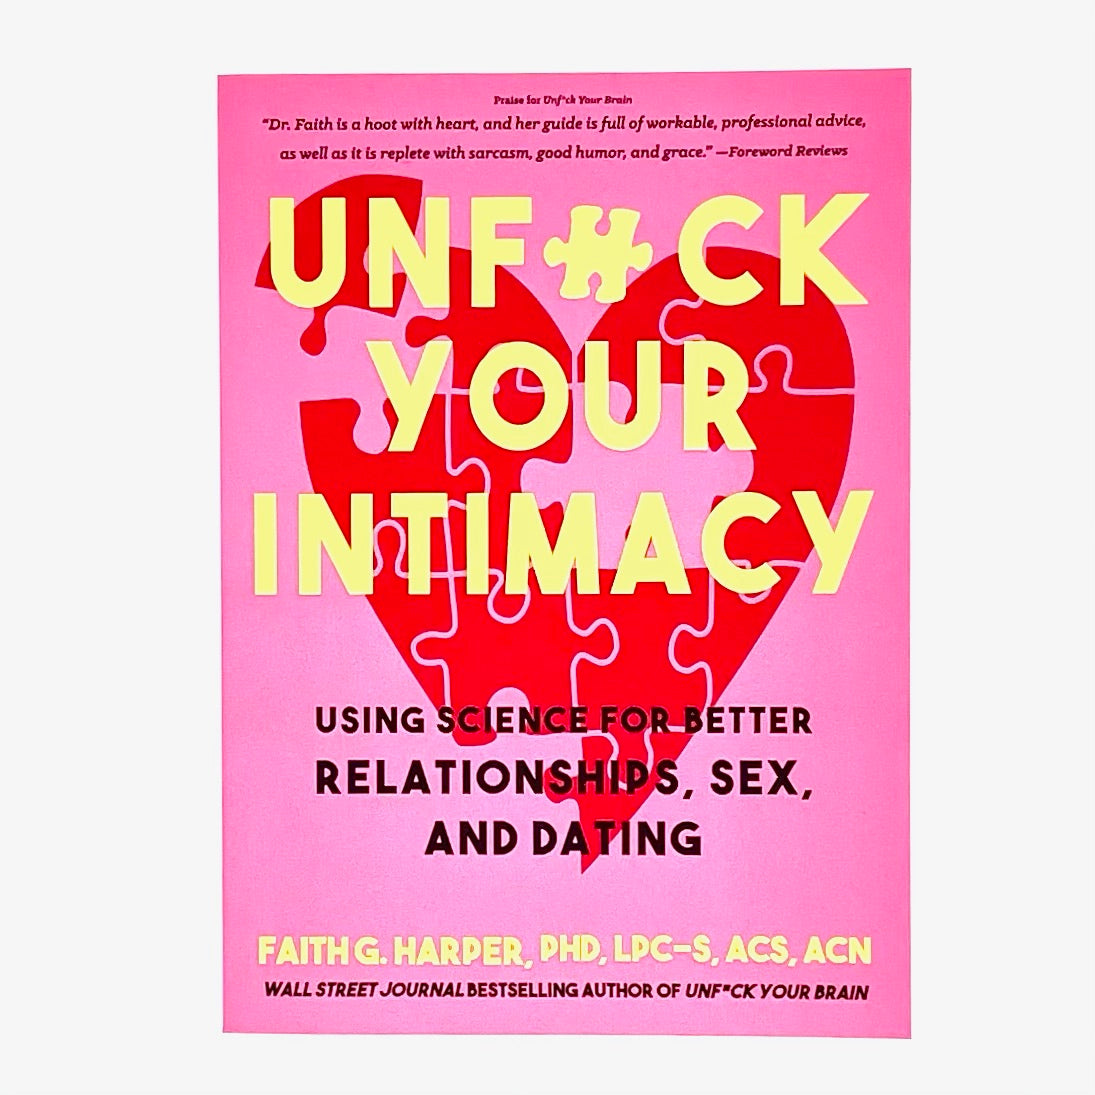 Book cover of Unfuck Your Intimacy, using science for better relationships, sex, and dating, by Faith G Harper.